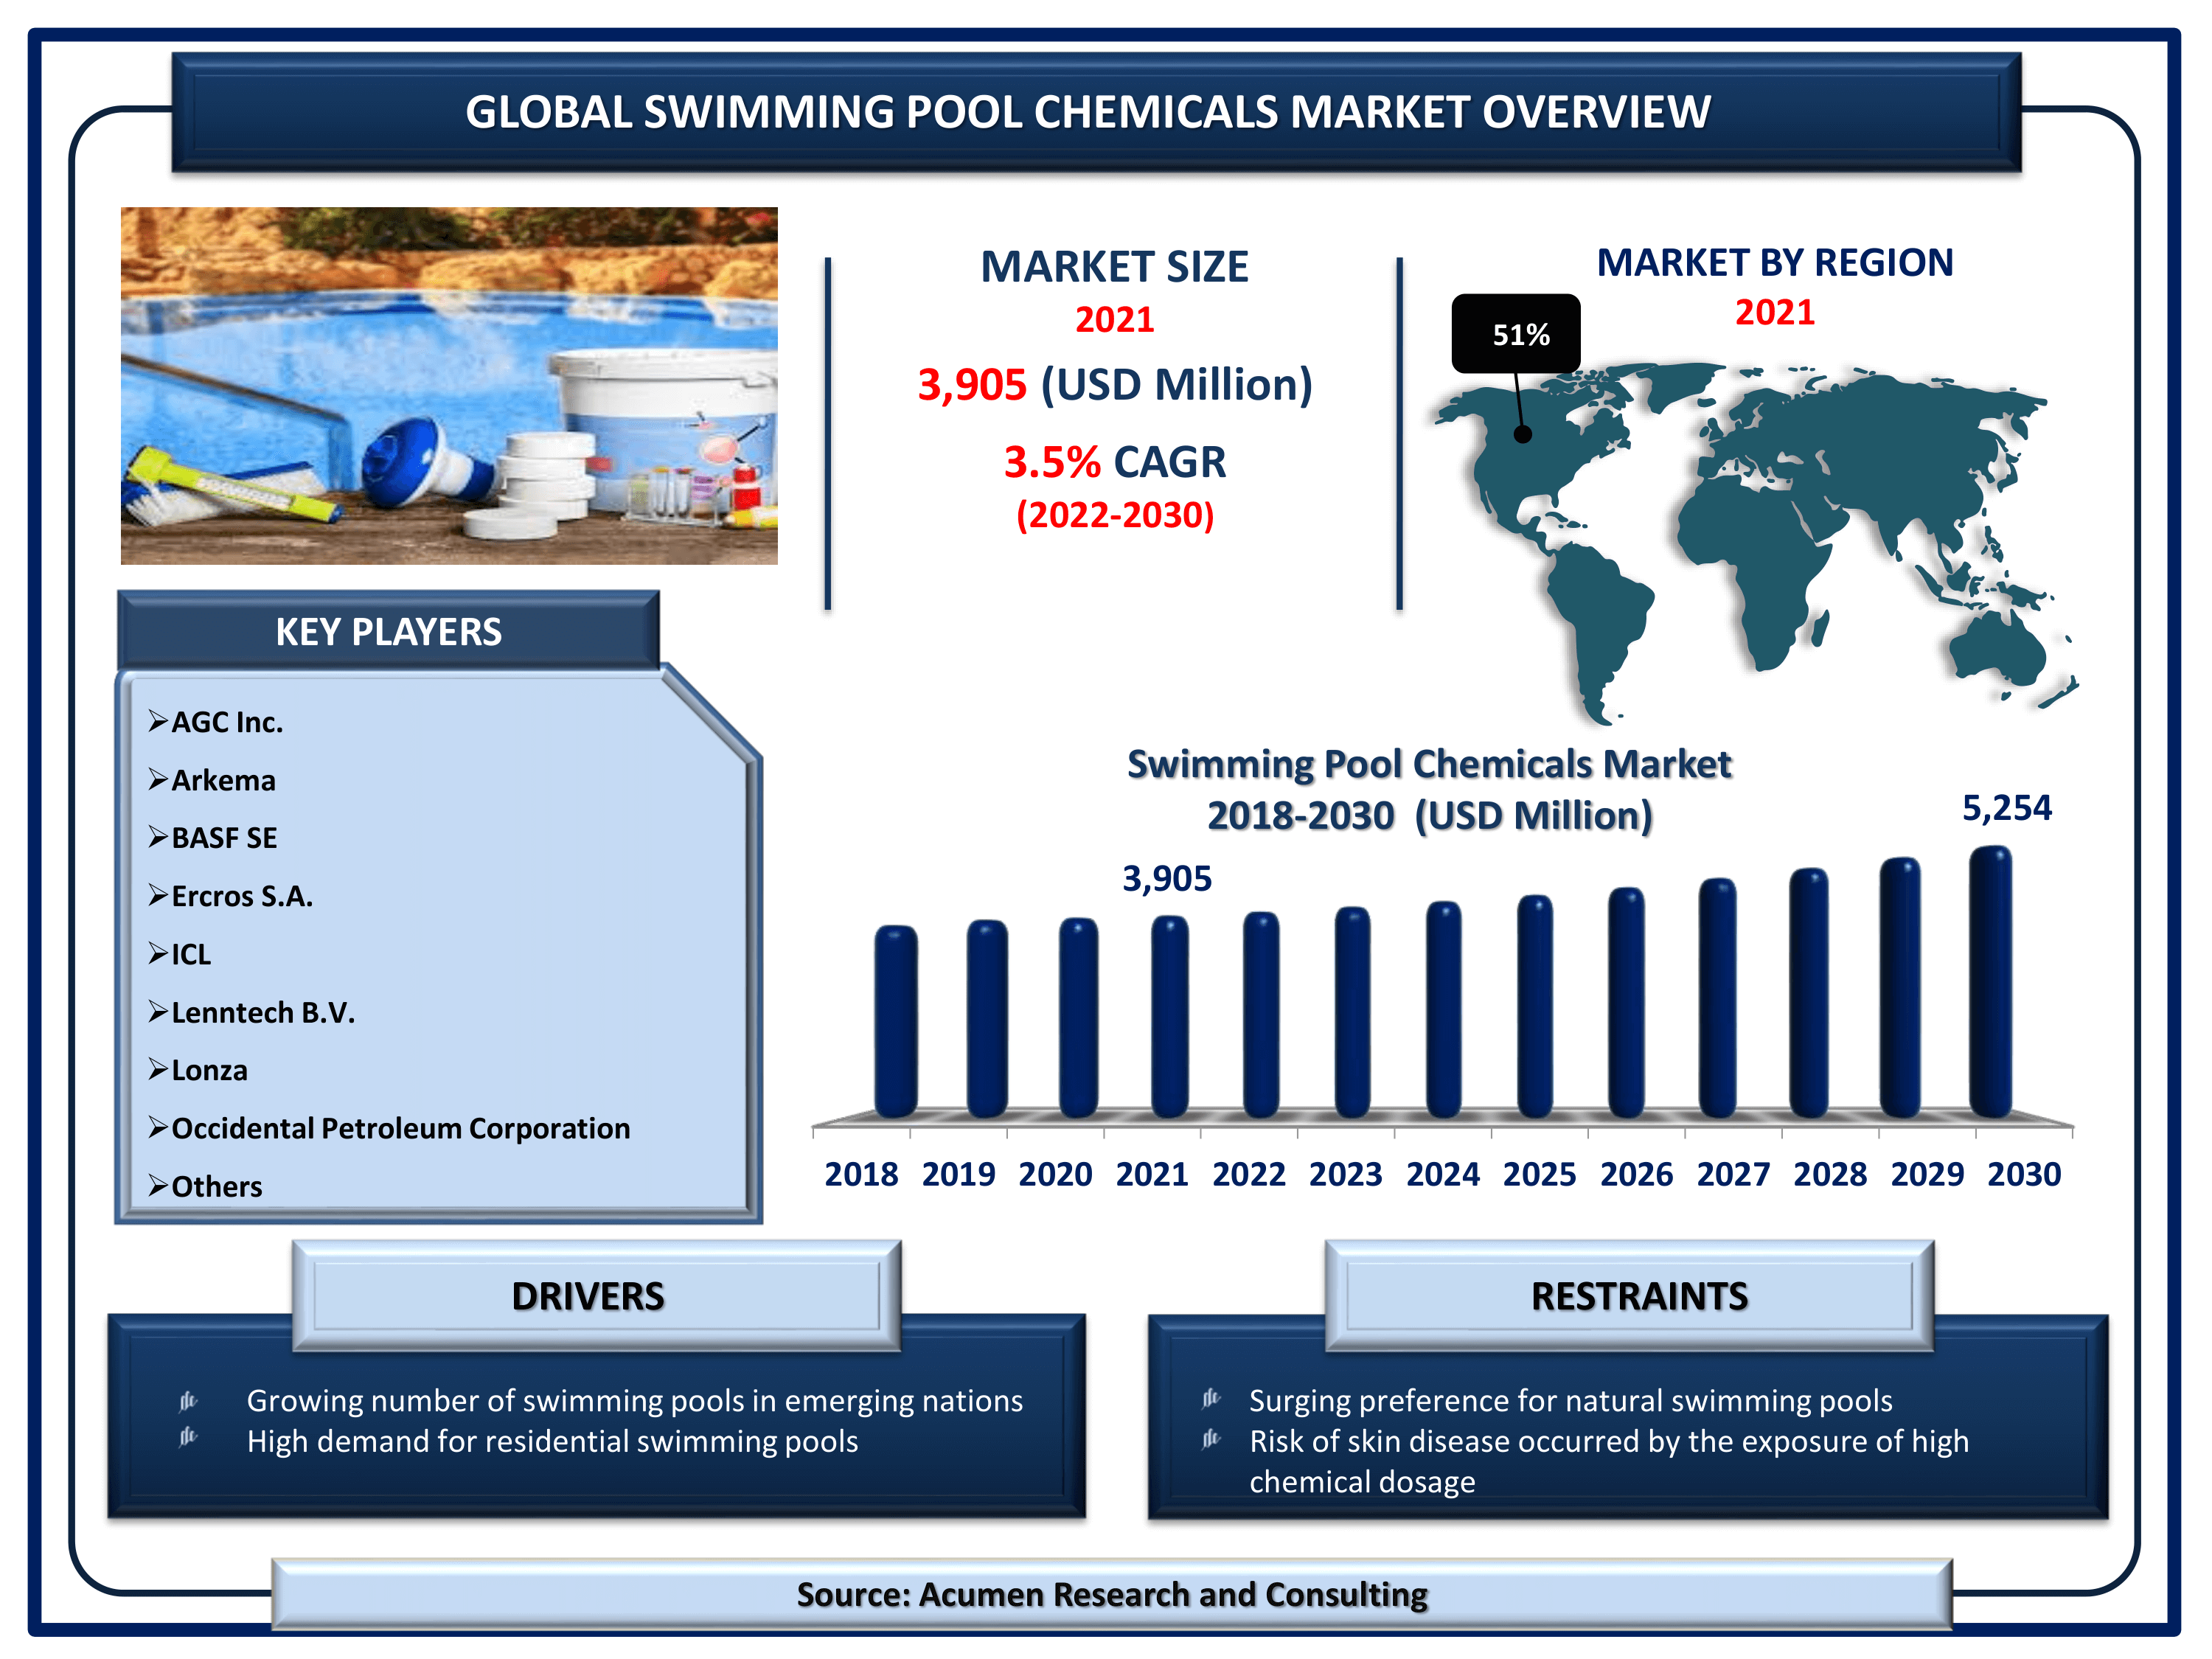 Global swimming pool chemicals market revenue is estimated to reach USD 5,254 Million by 2030 with a CAGR of 3.5% from 2022 to 2030